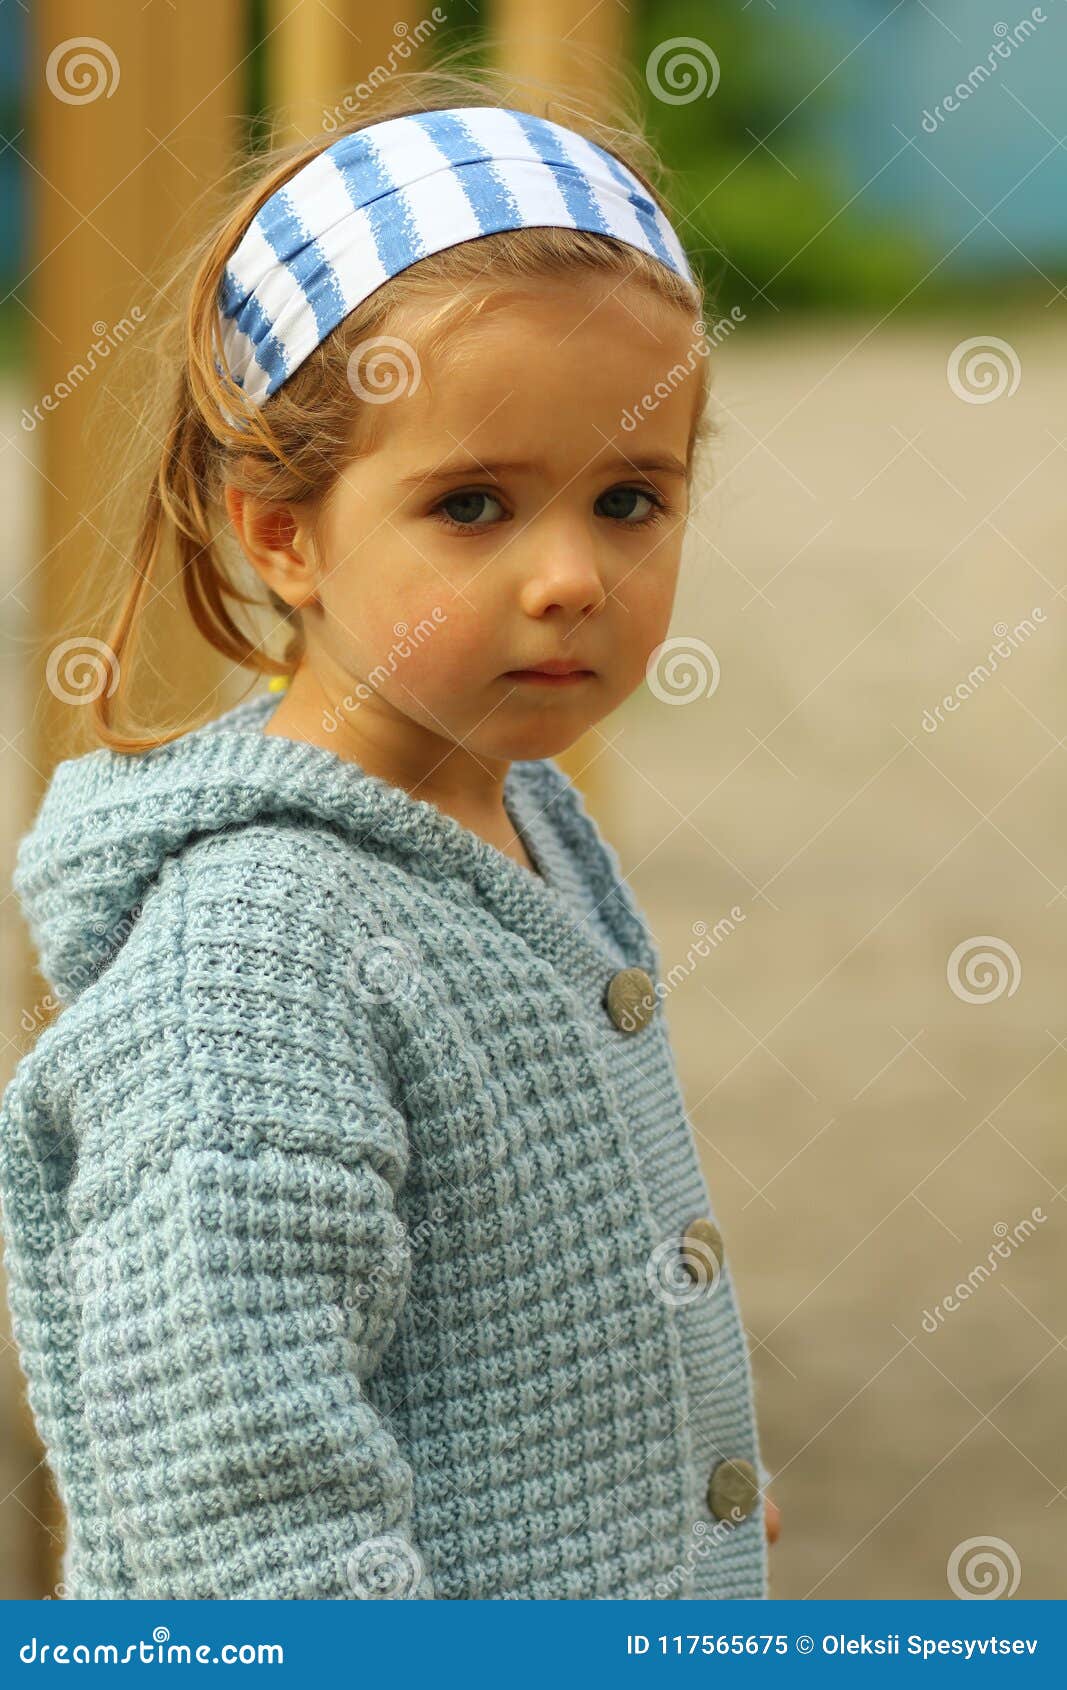 Close Up Portrait Of A Serious Toddler Girl In Blue Hand